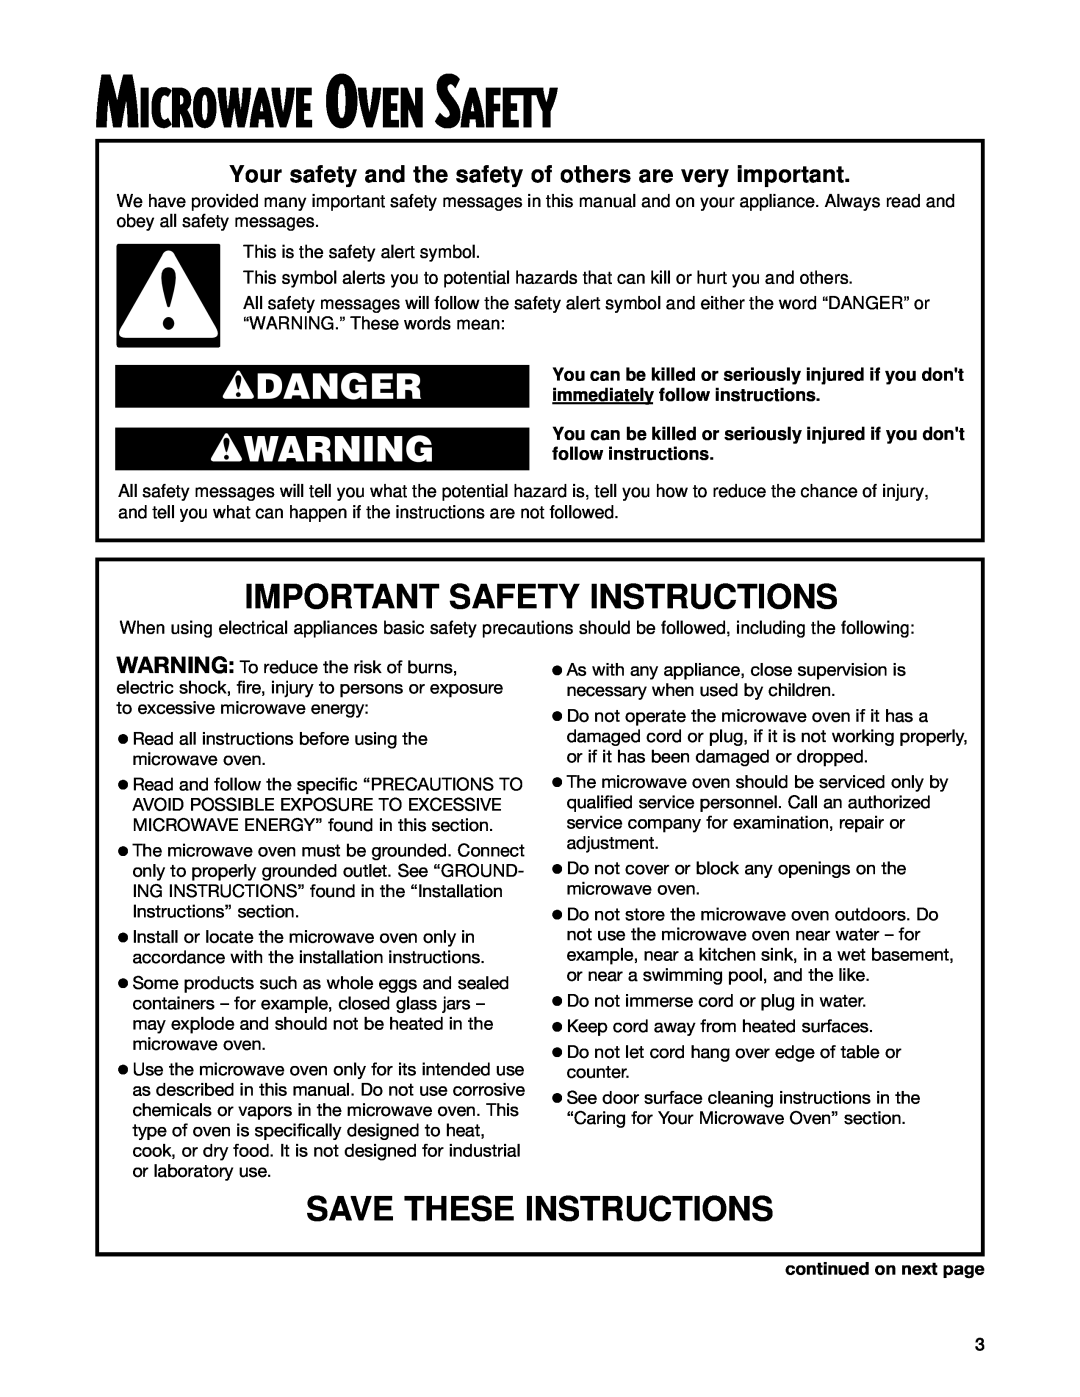 Whirlpool pmn Microwave Oven Safety, wDANGER wWARNING, Important Safety Instructions, Save These Instructions 